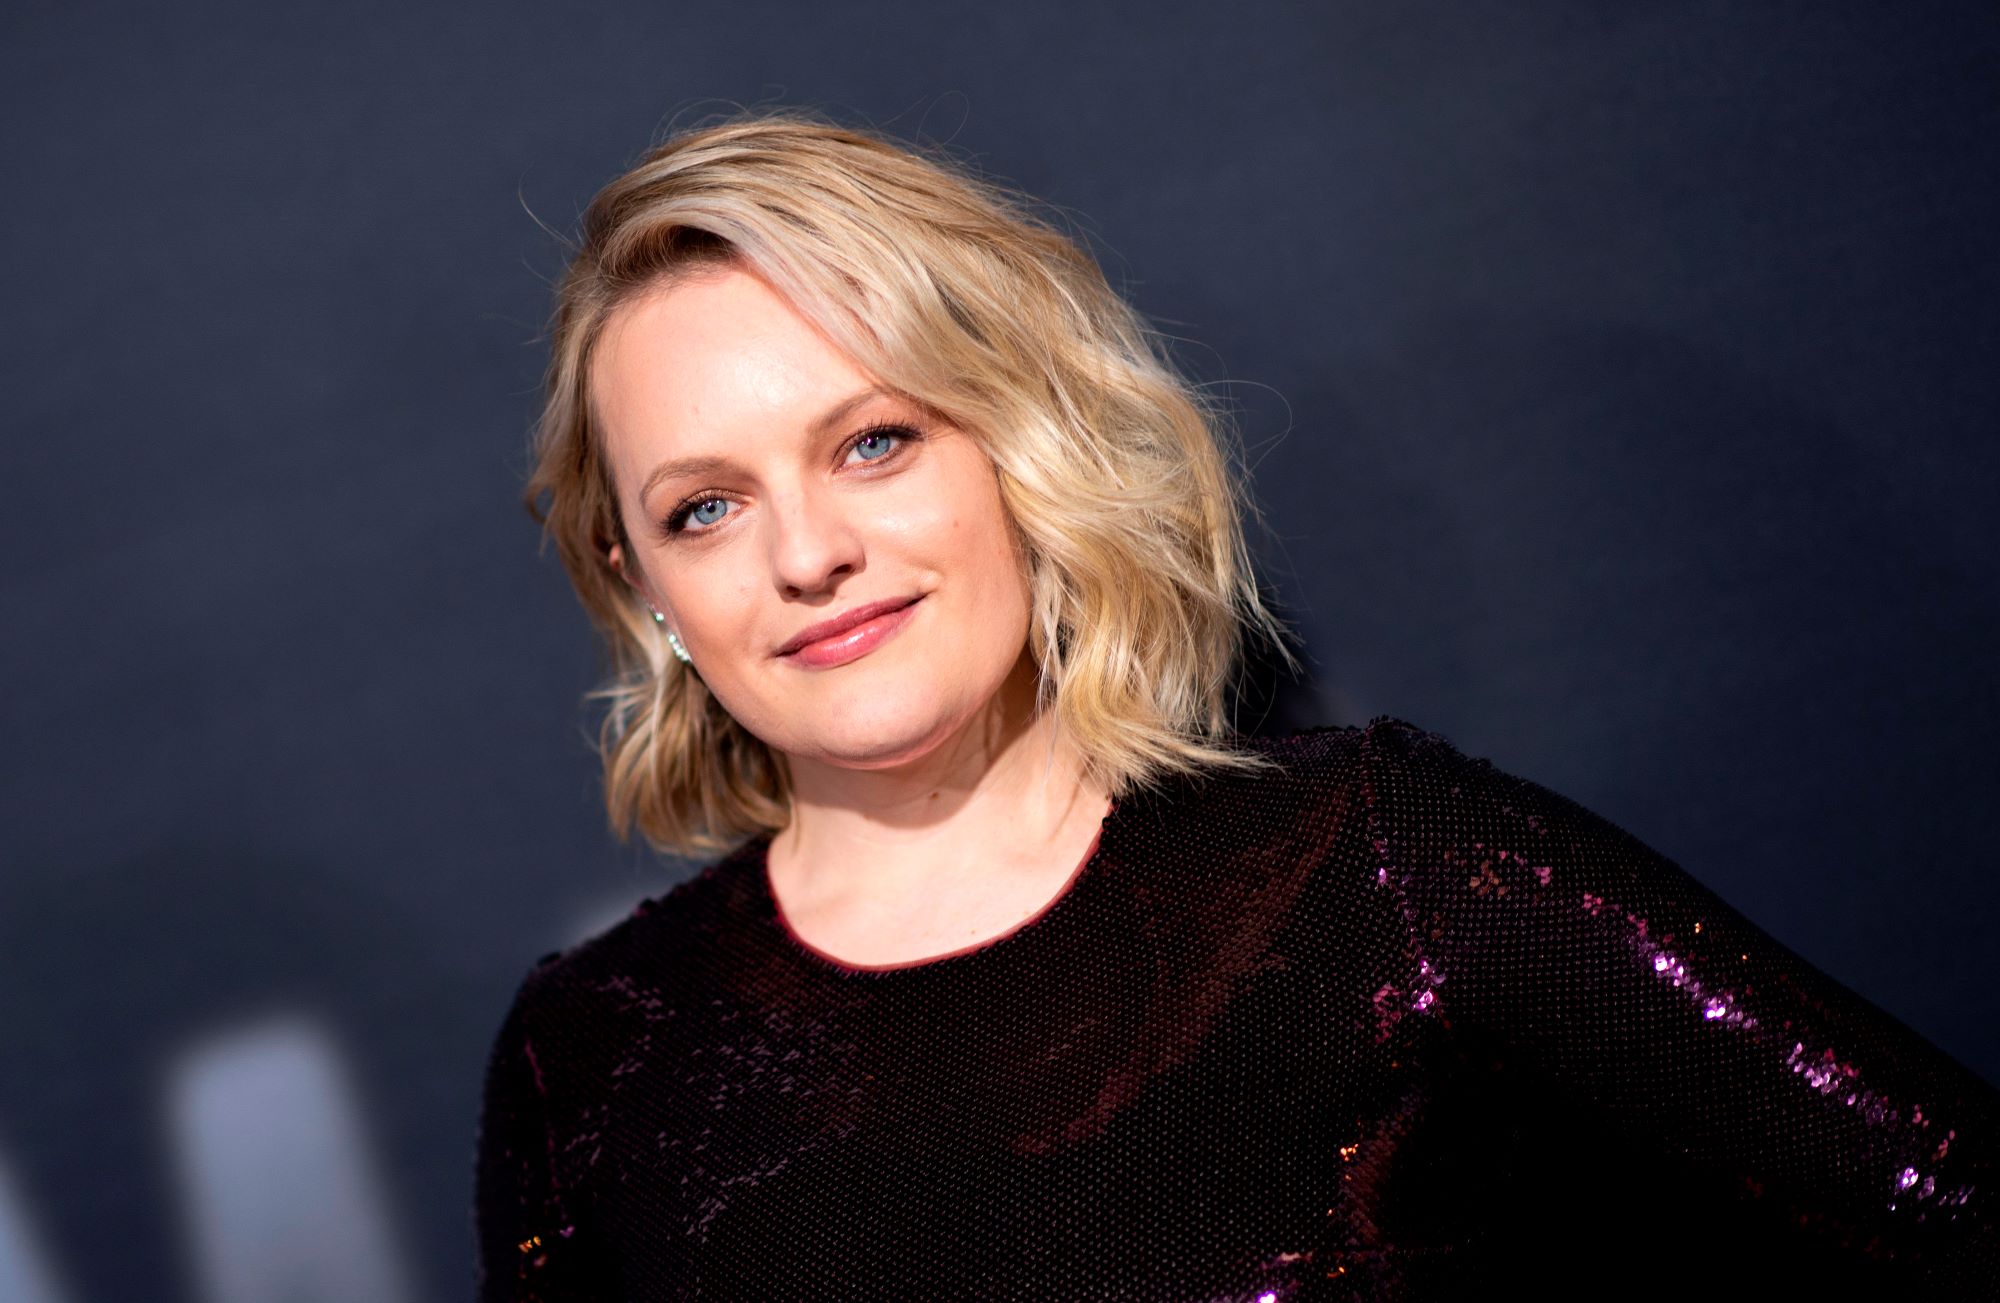 Elisabeth Moss standing in front of black background with a dark purple top.